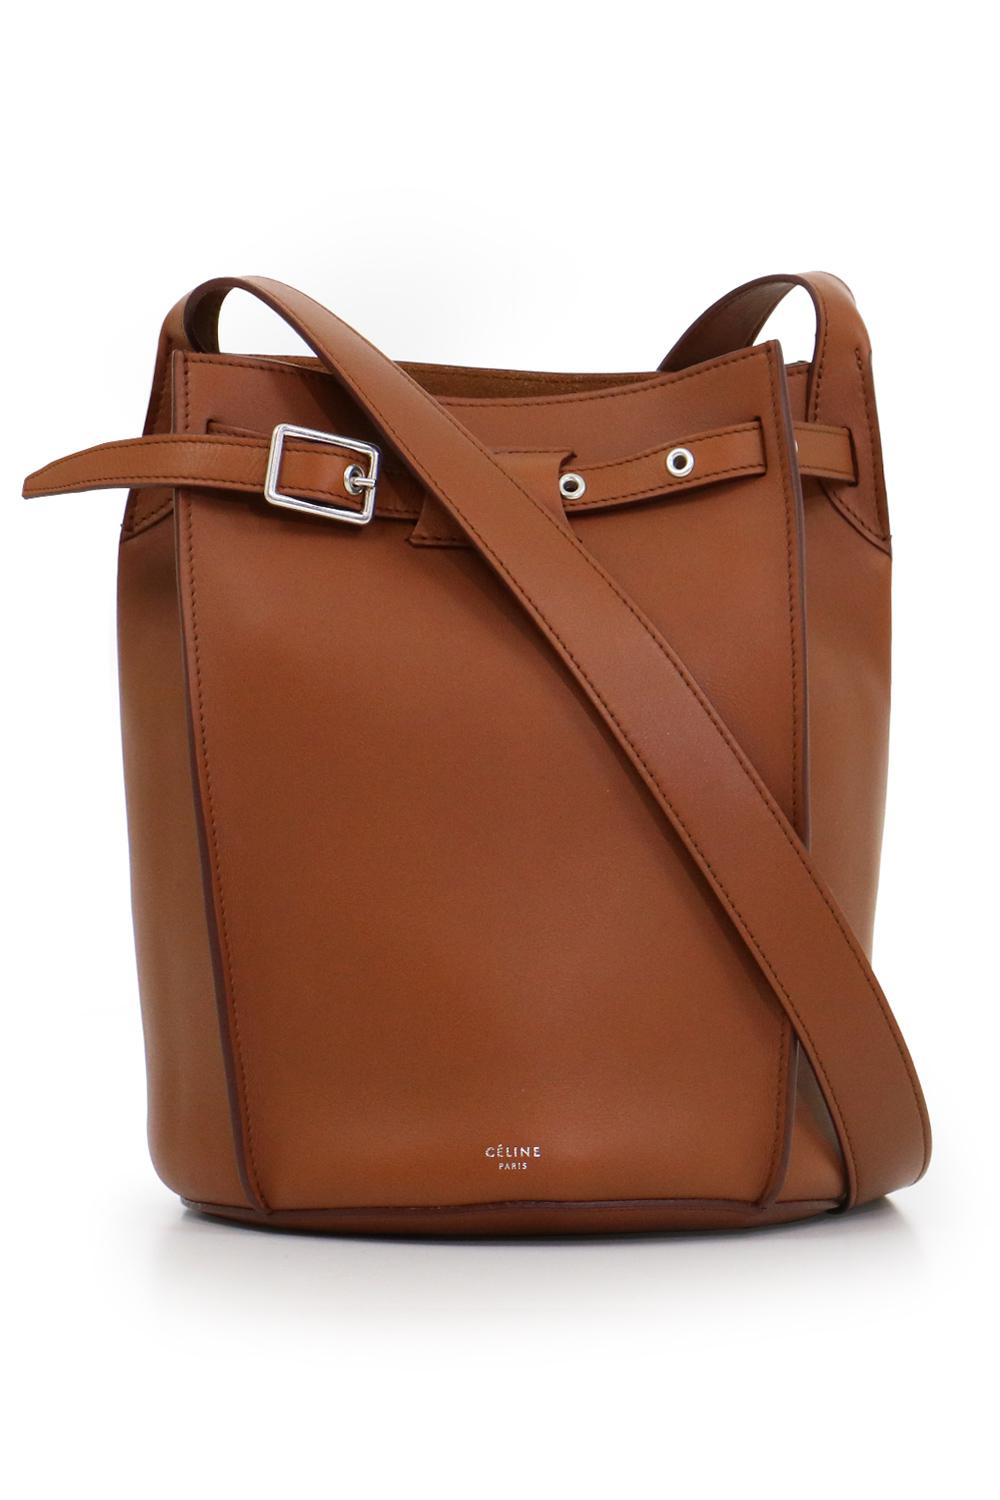 Céline Leather Big Bag Bucket Bag With Long Strap Tan in Brown - Lyst